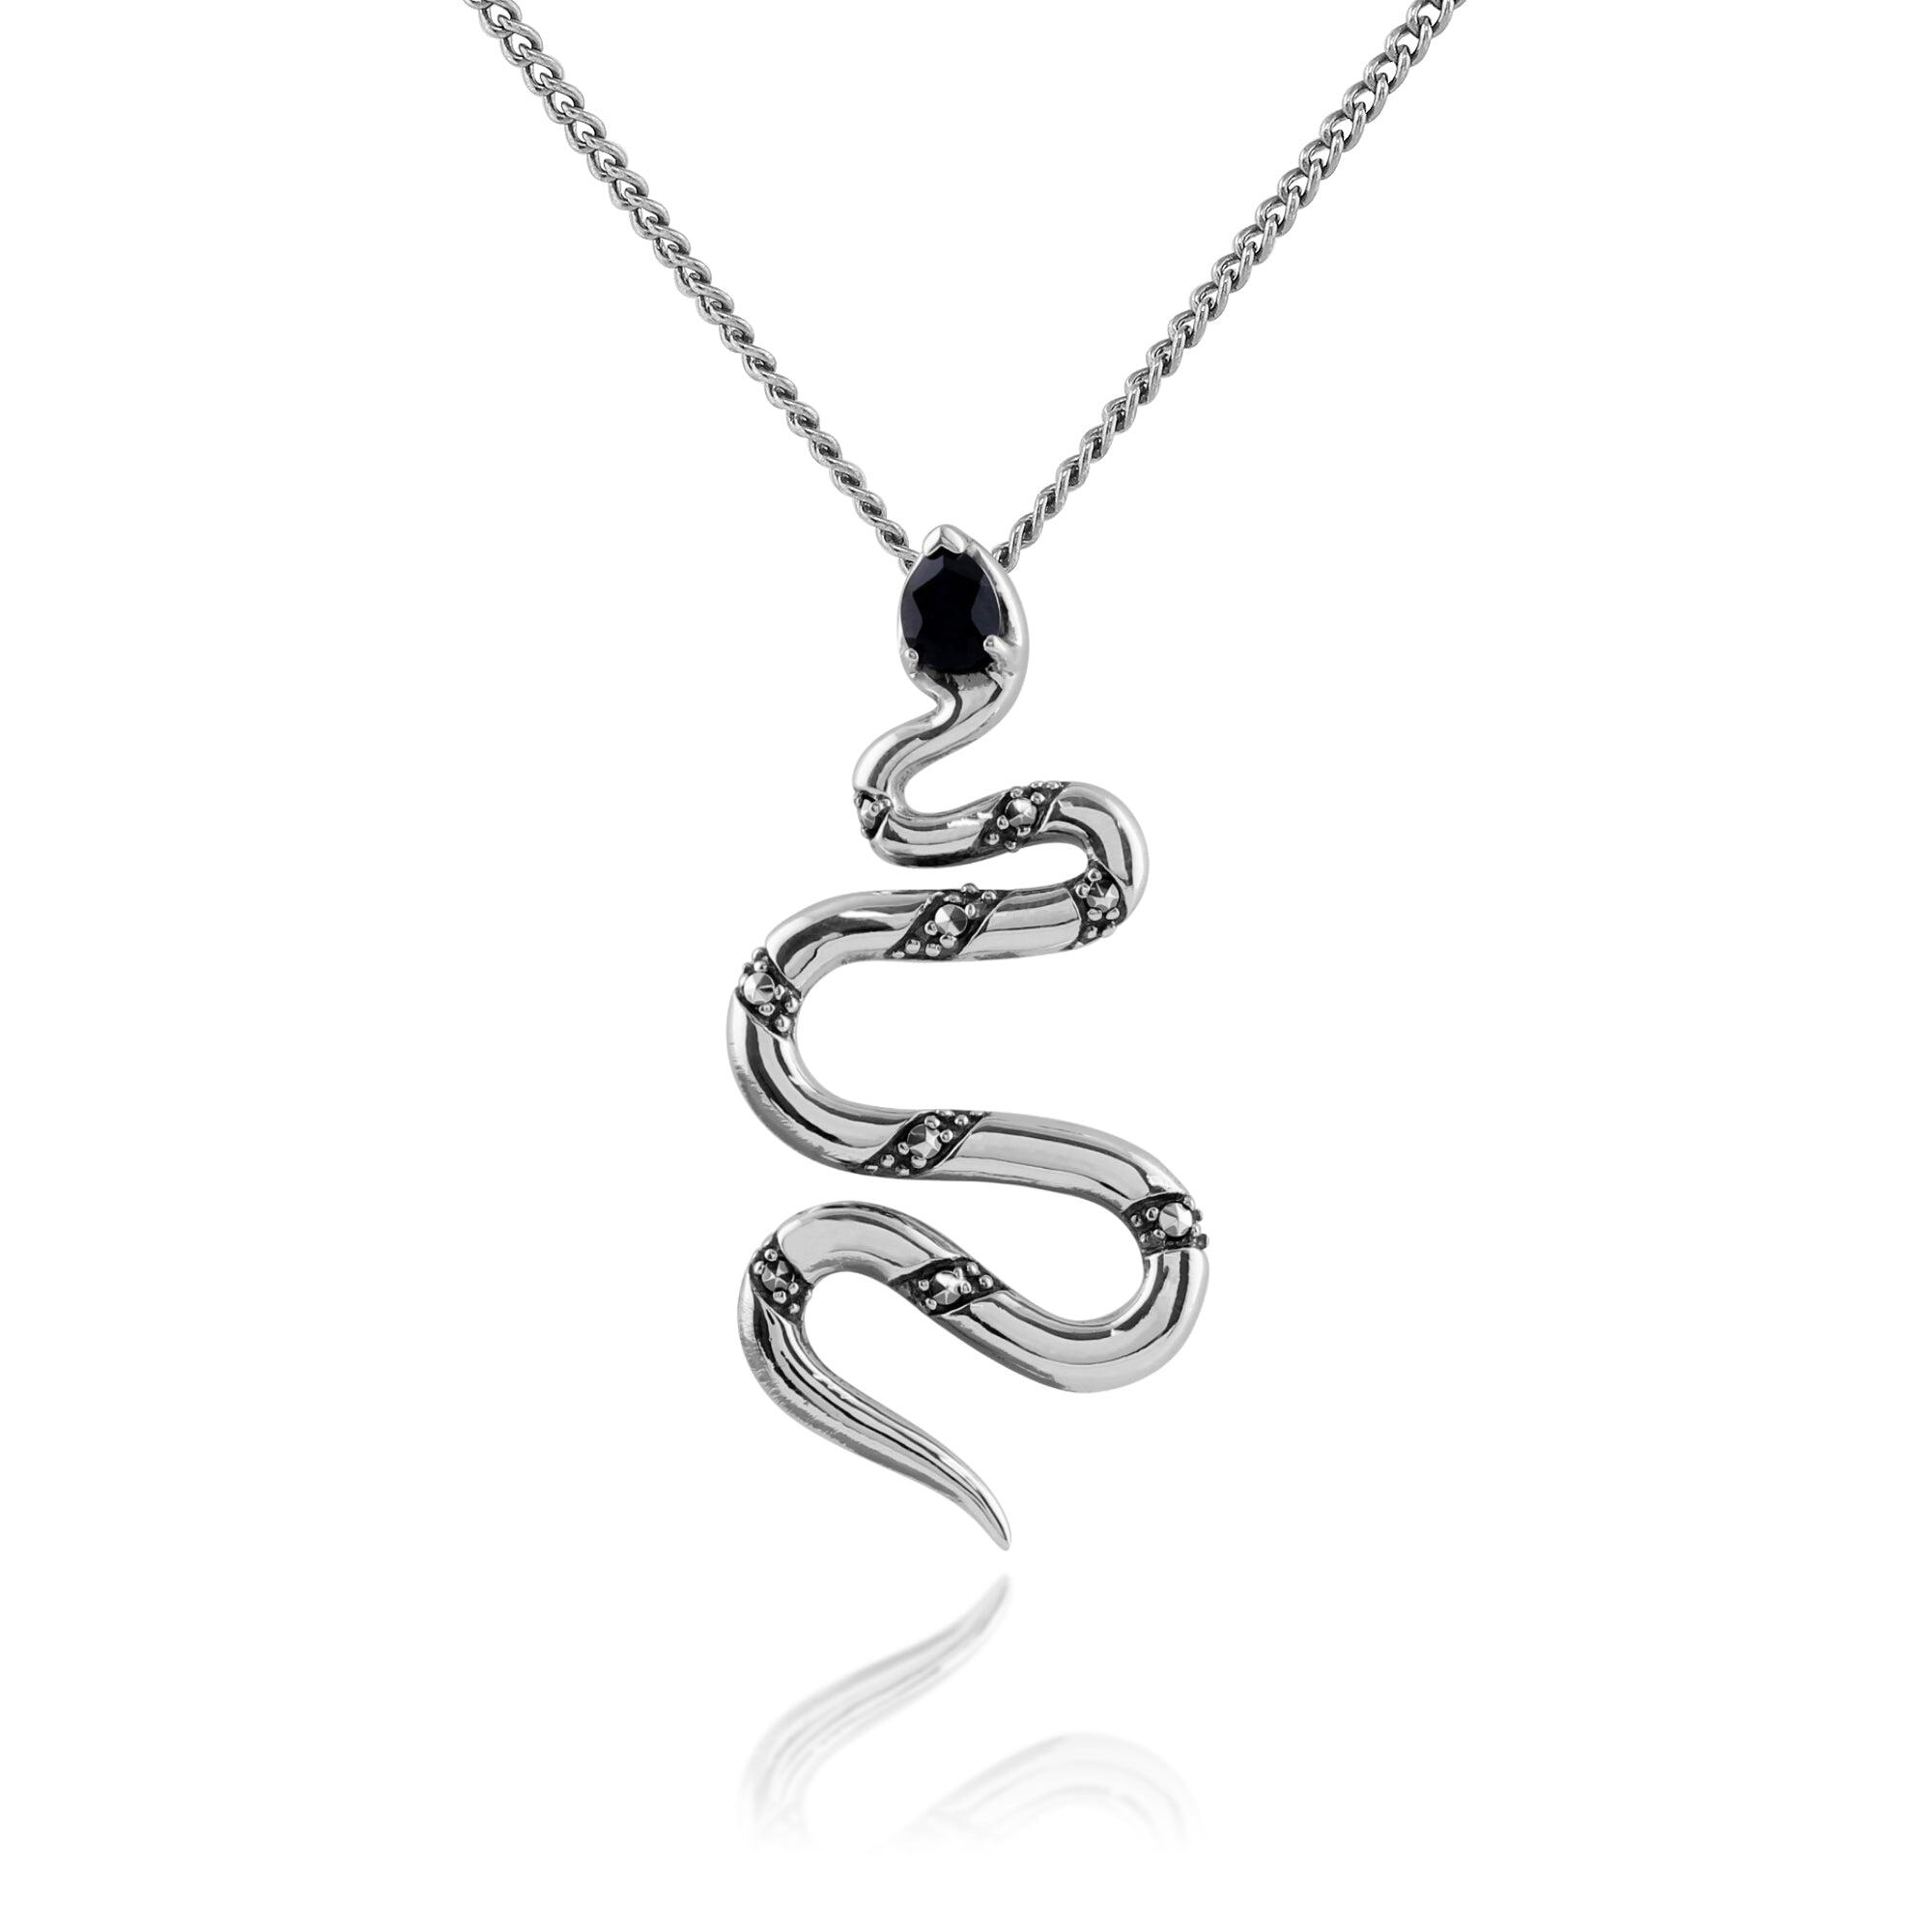 Art Deco Style Pear Black Spinel & Marcasite Snake Necklace in 925 Sterling Silver